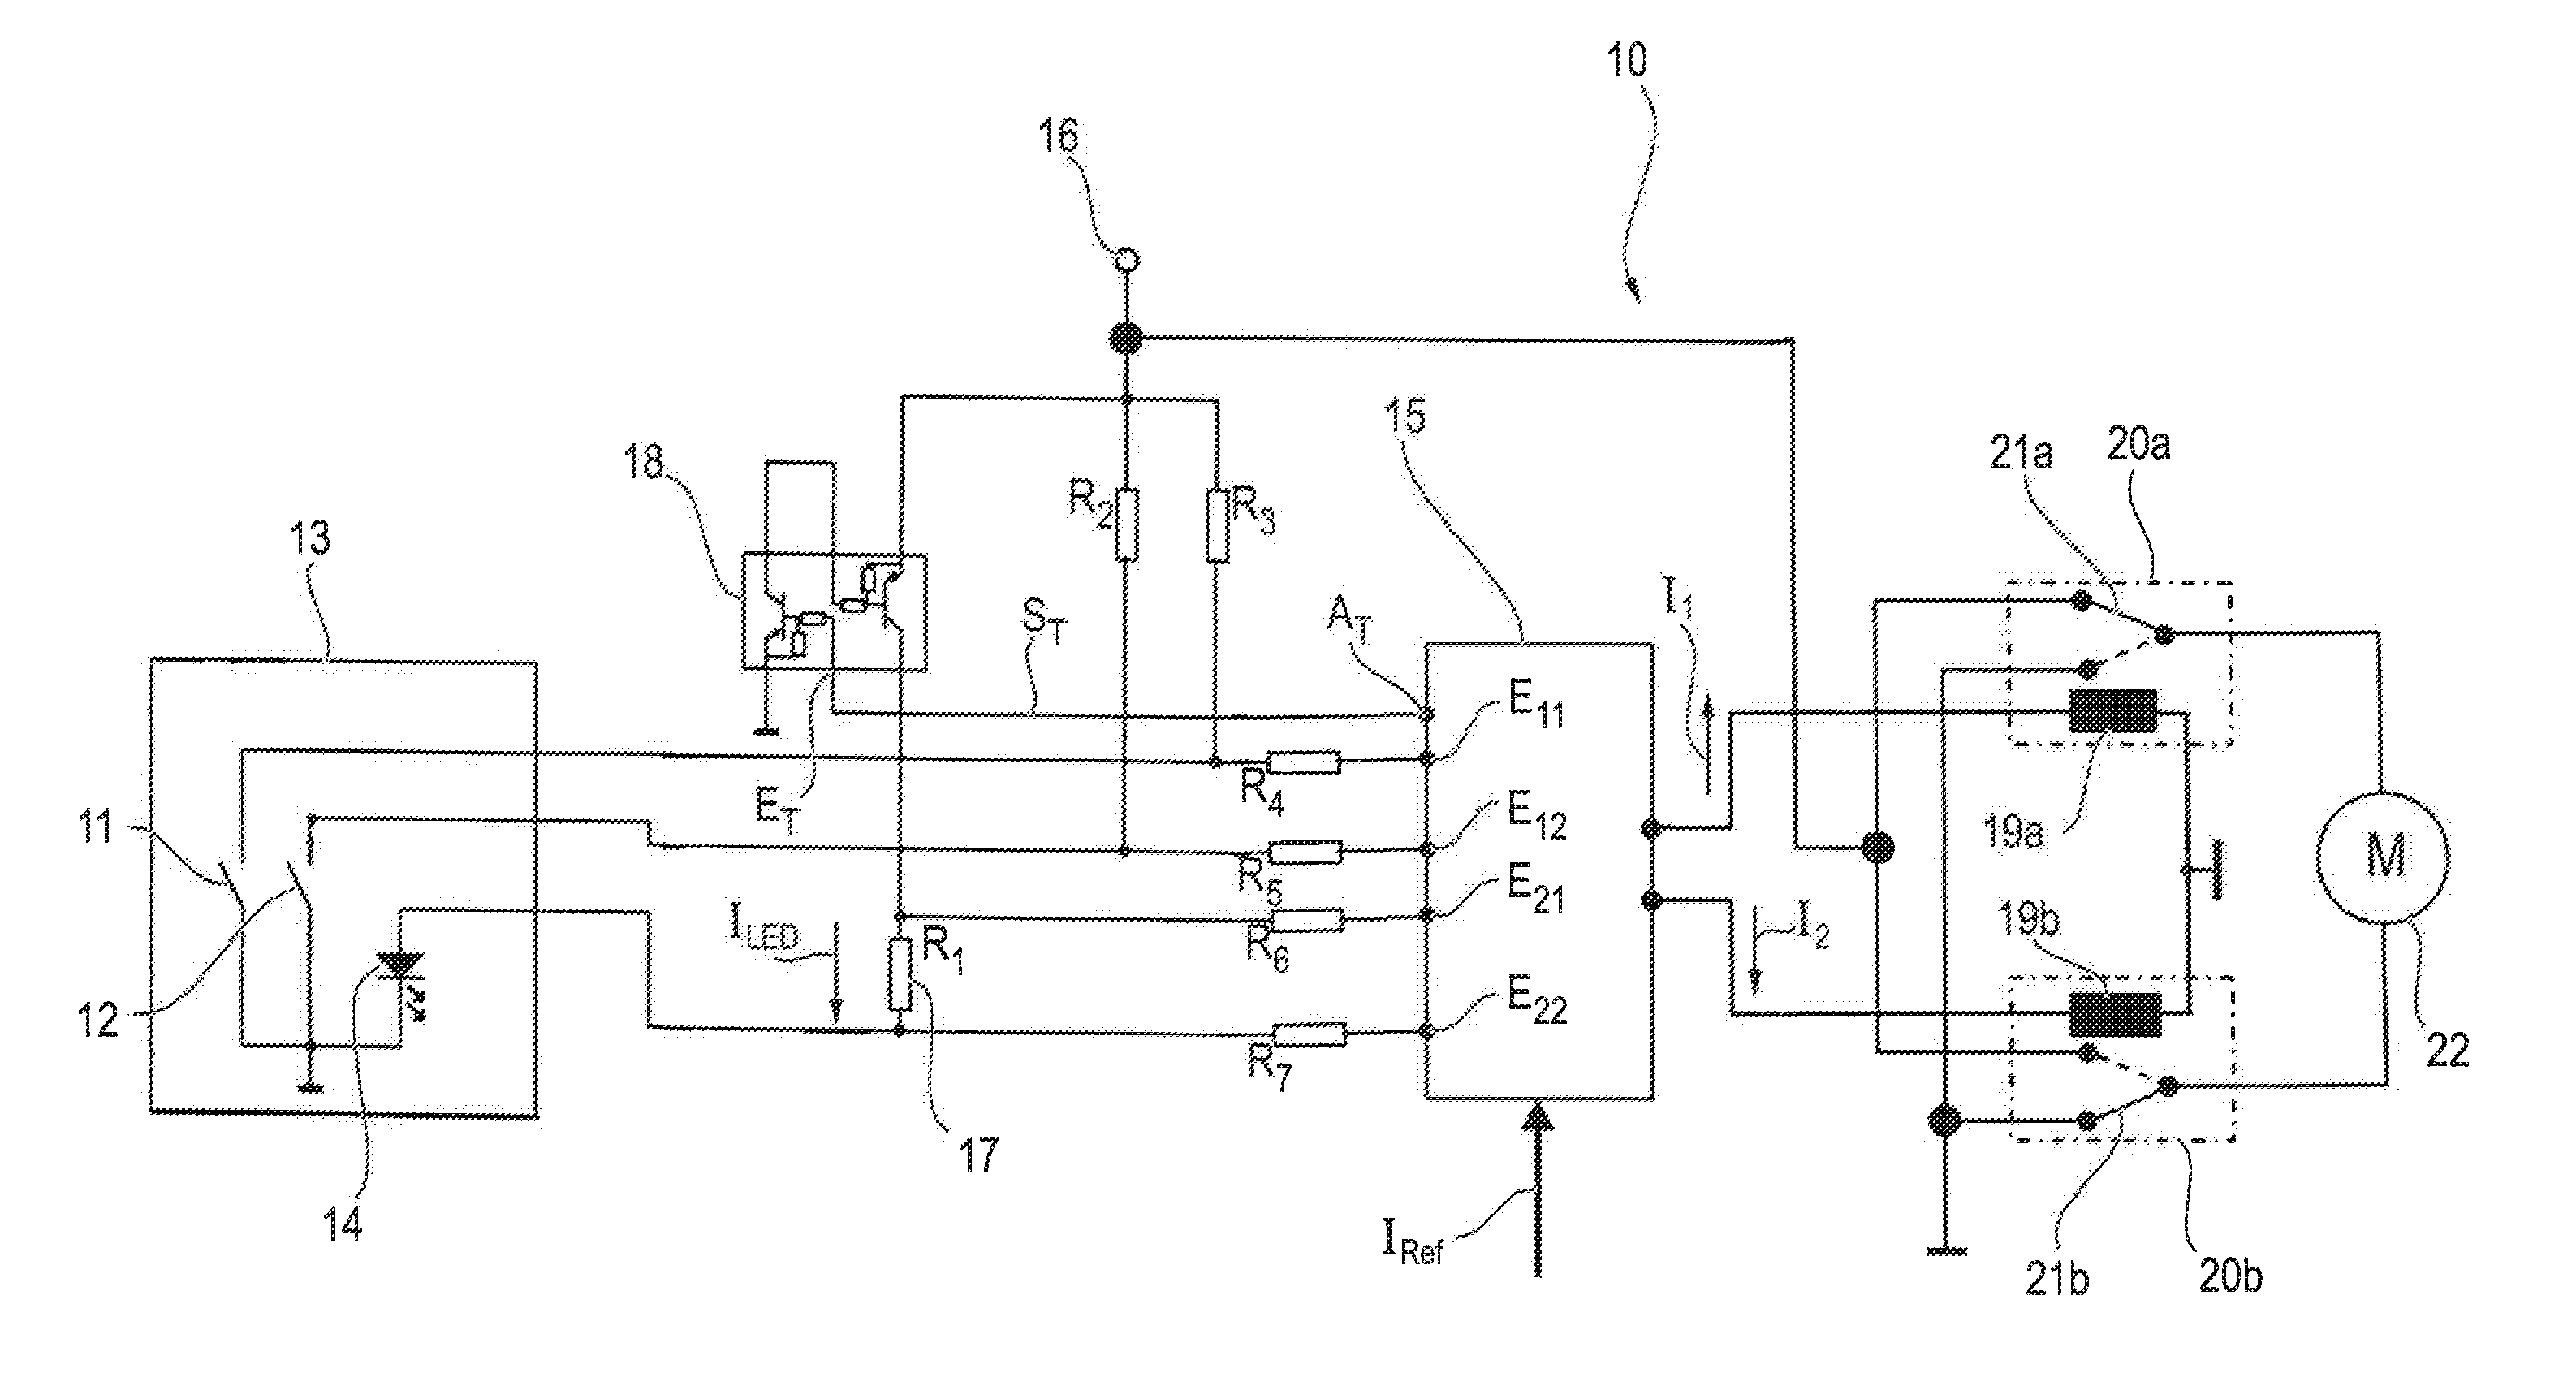 Control Circuit for a Window Lifter Drive